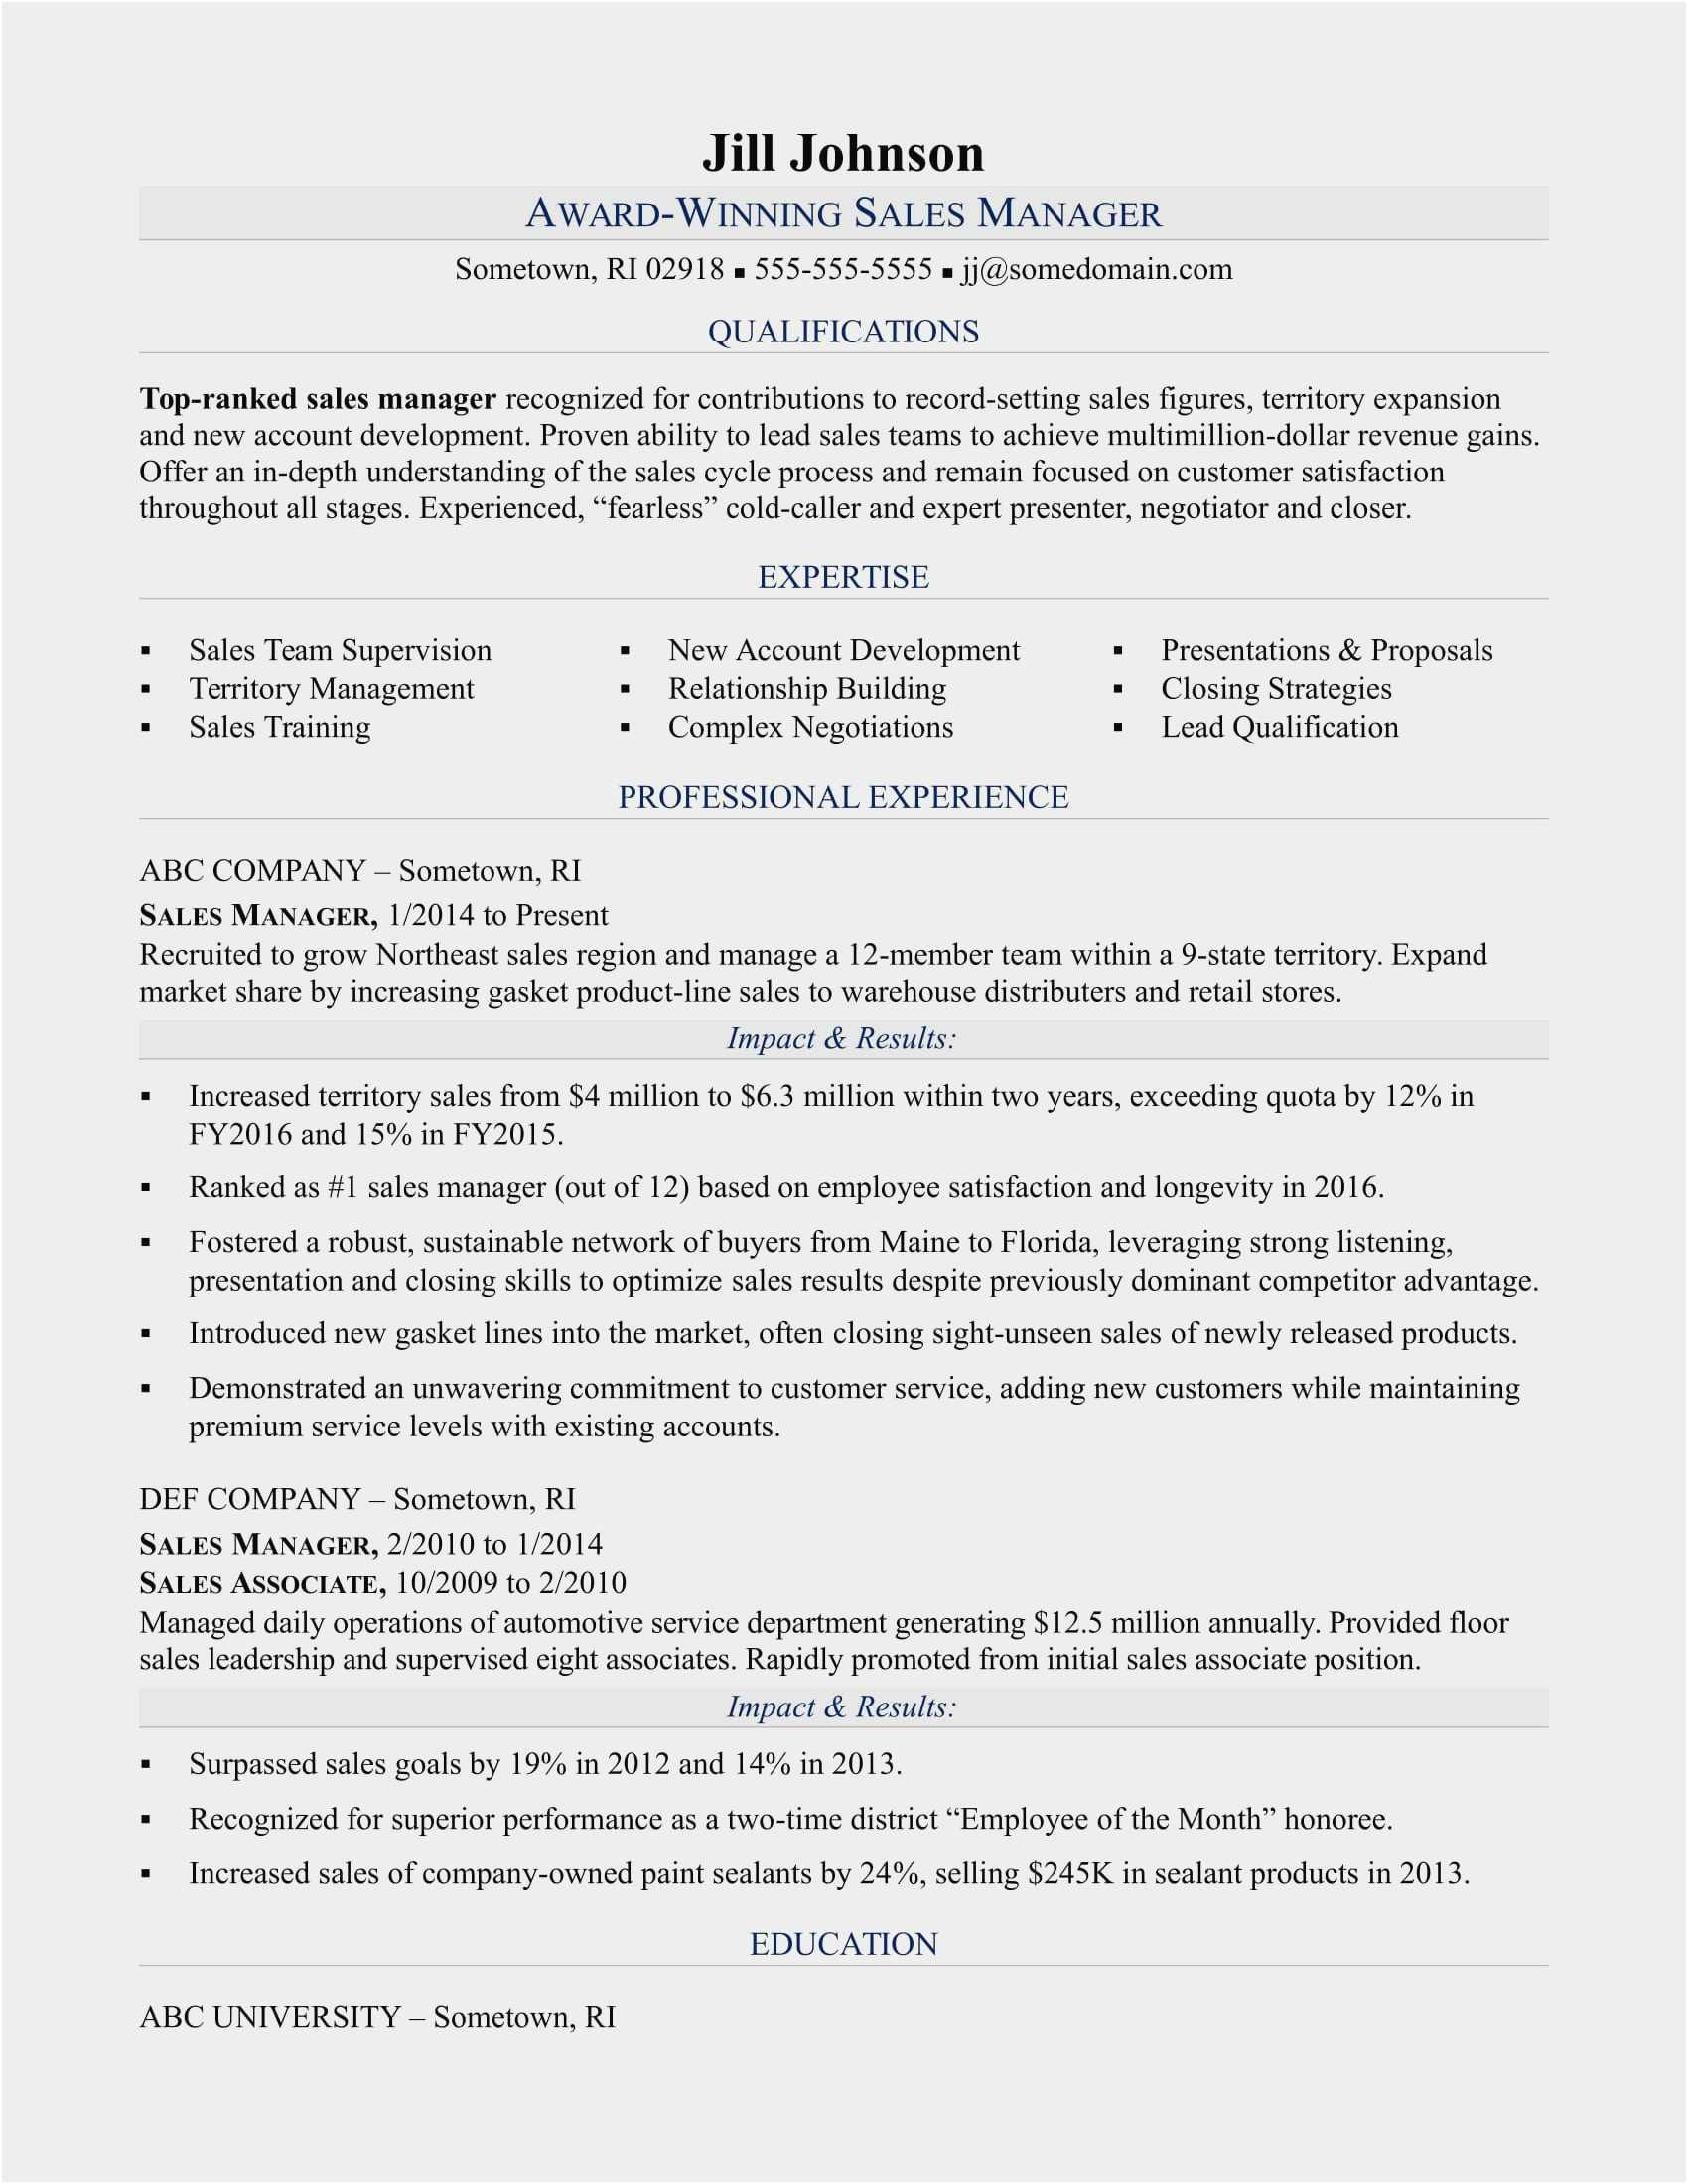 Free Resume Writing Tips and Samples Download 53 Business to Business Sales Resume Sample